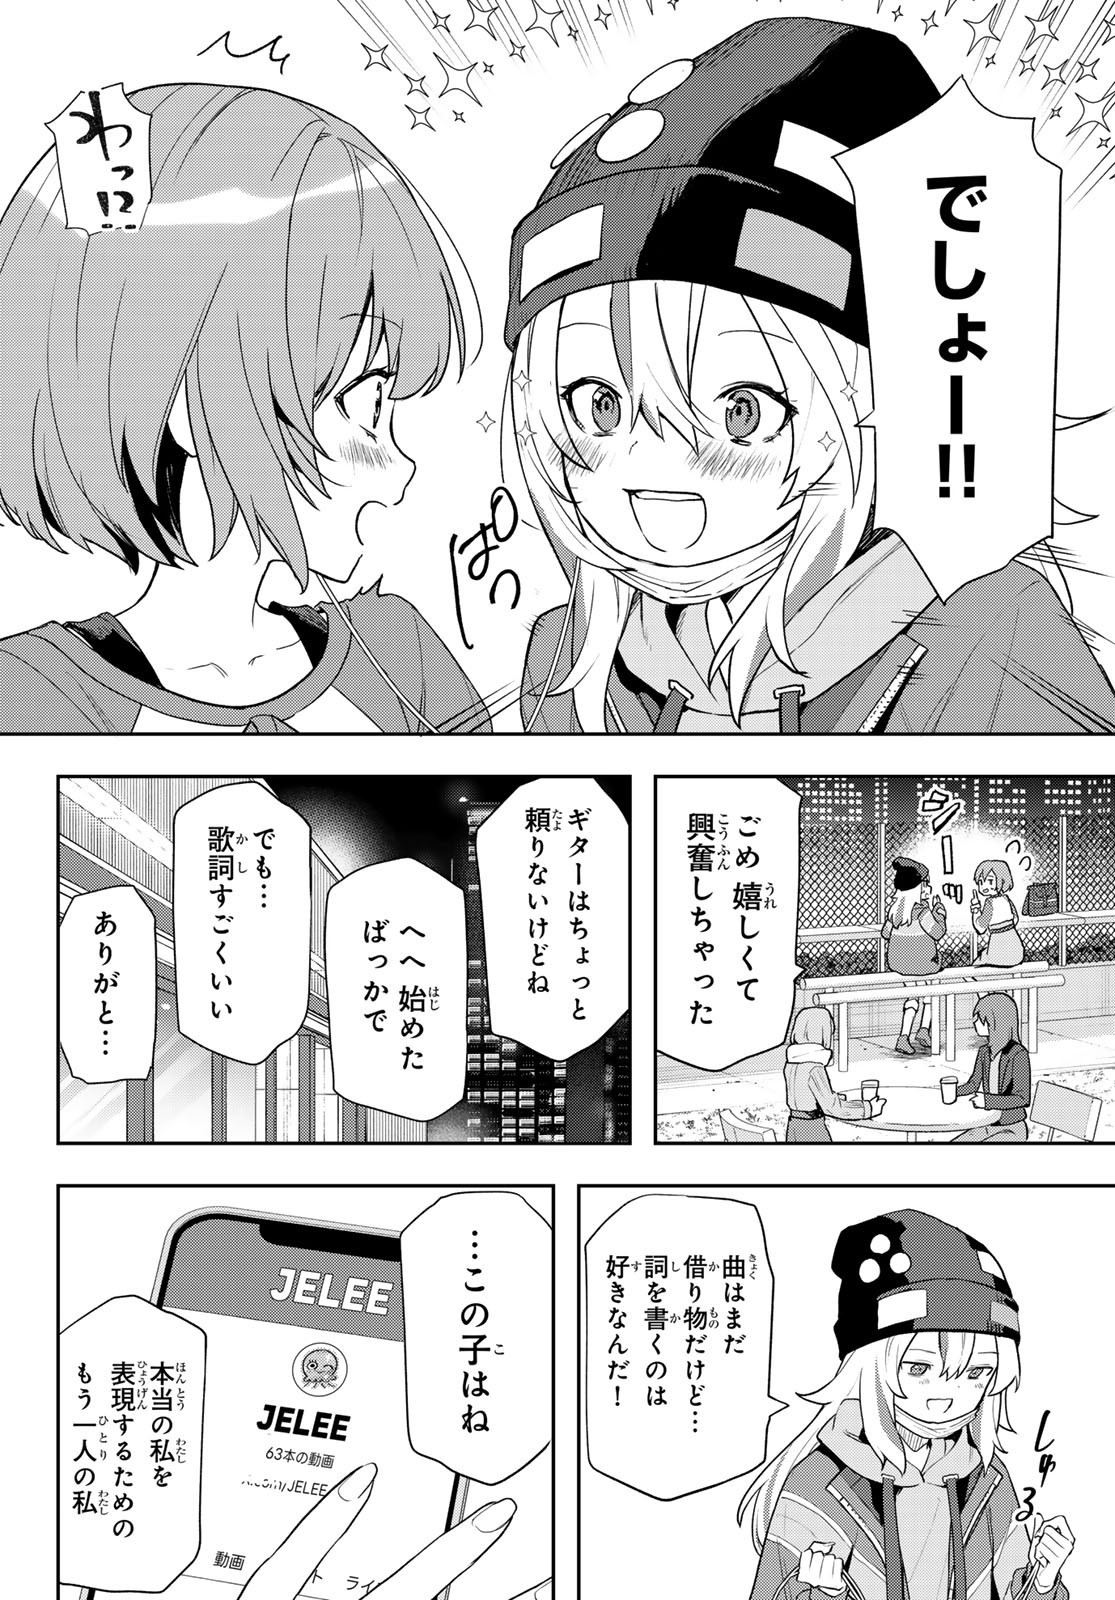 Weekly Shōnen Magazine - 週刊少年マガジン - Chapter 2024-24 - Page 525